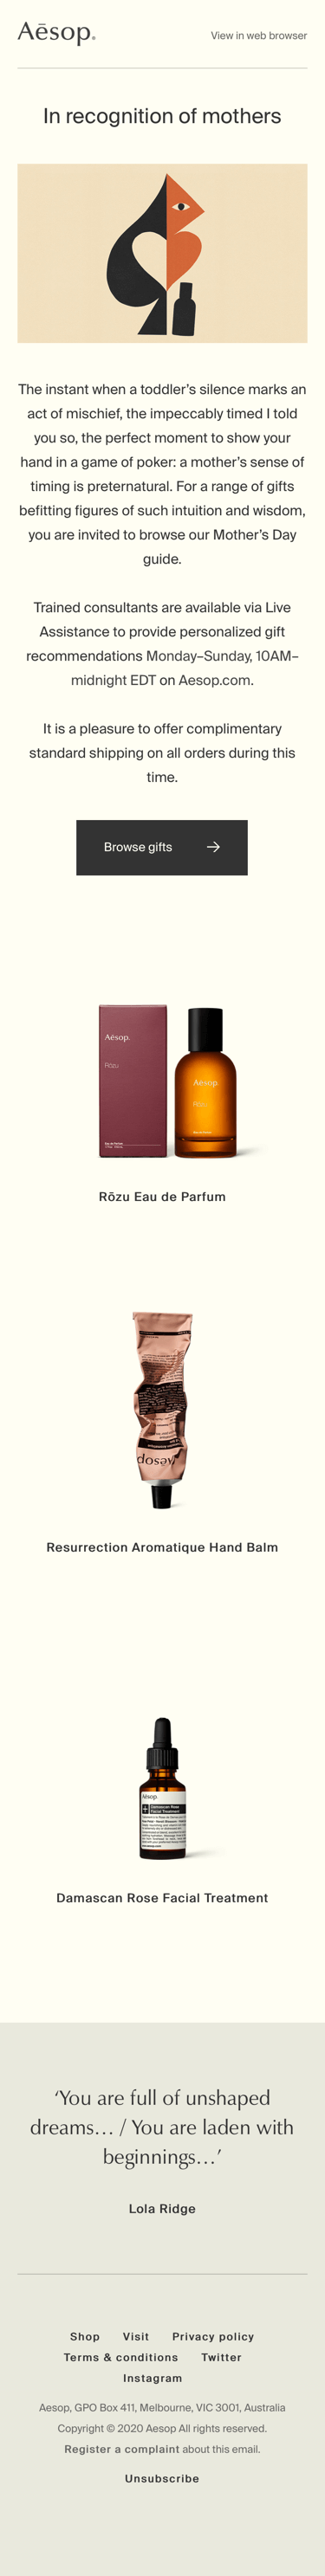 Aesop mobile-friendly emails.